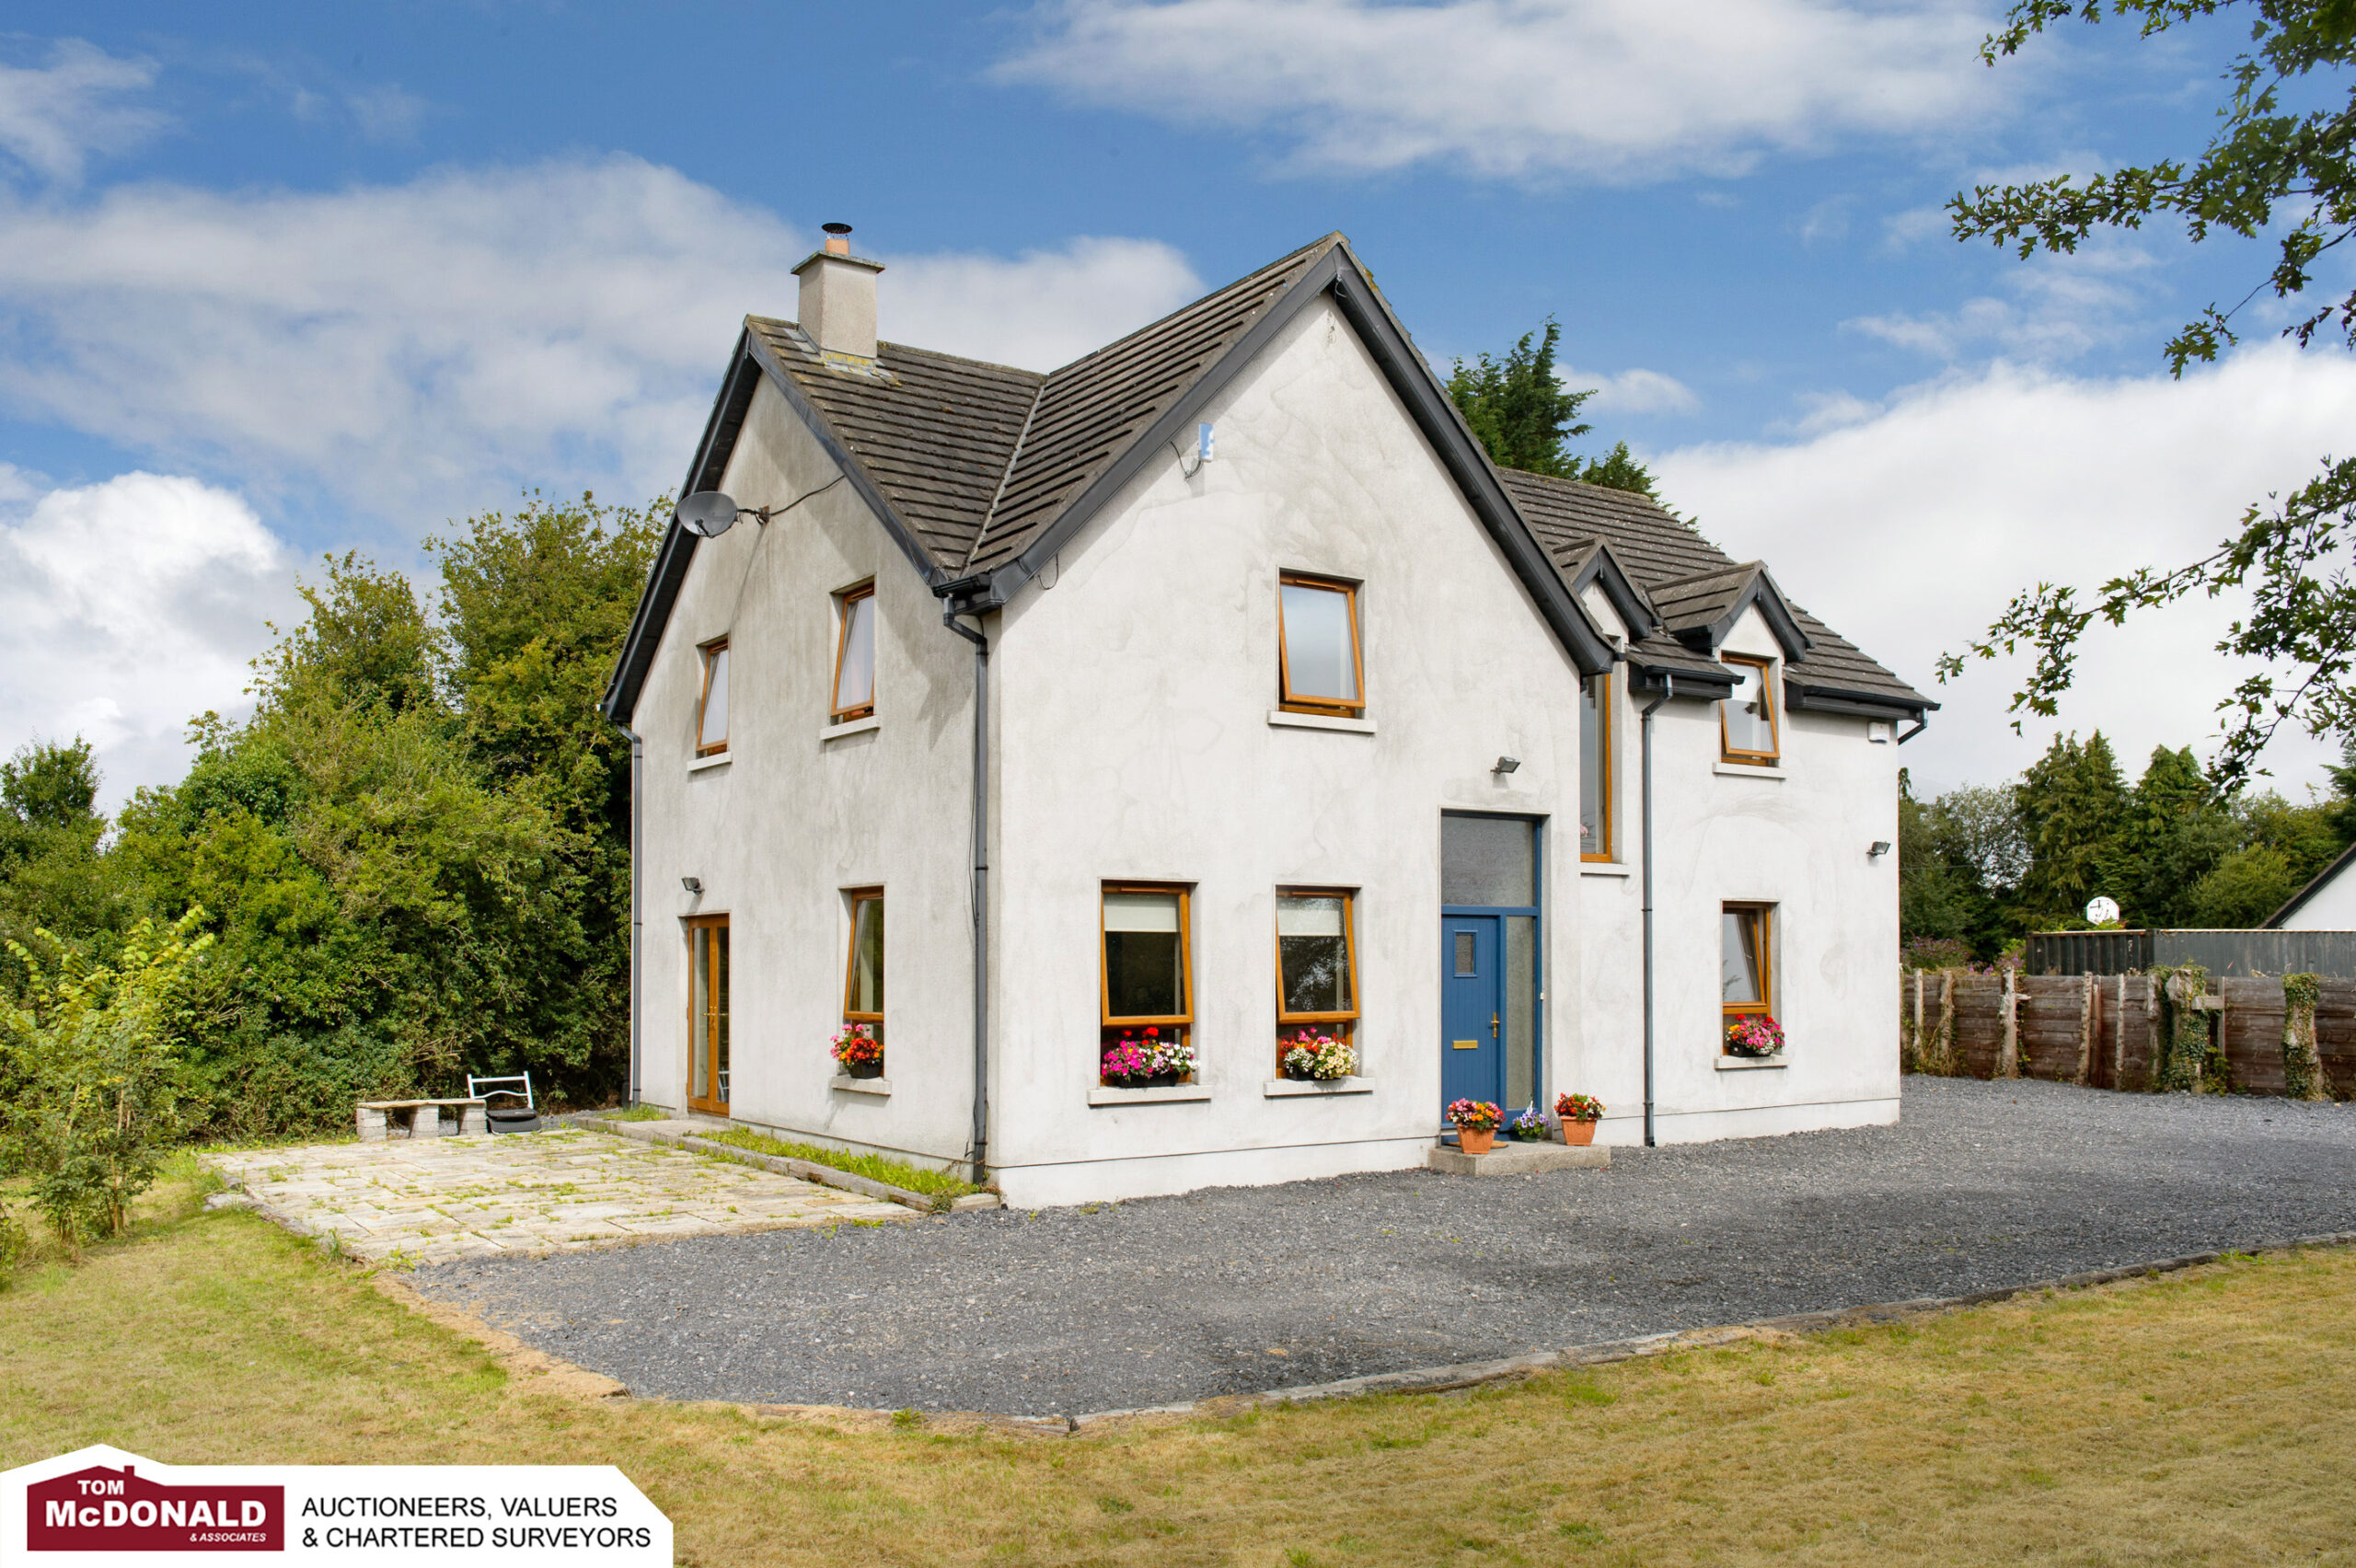 Detached family home for sale in Clonsast with Tom McDonald Auctioneers